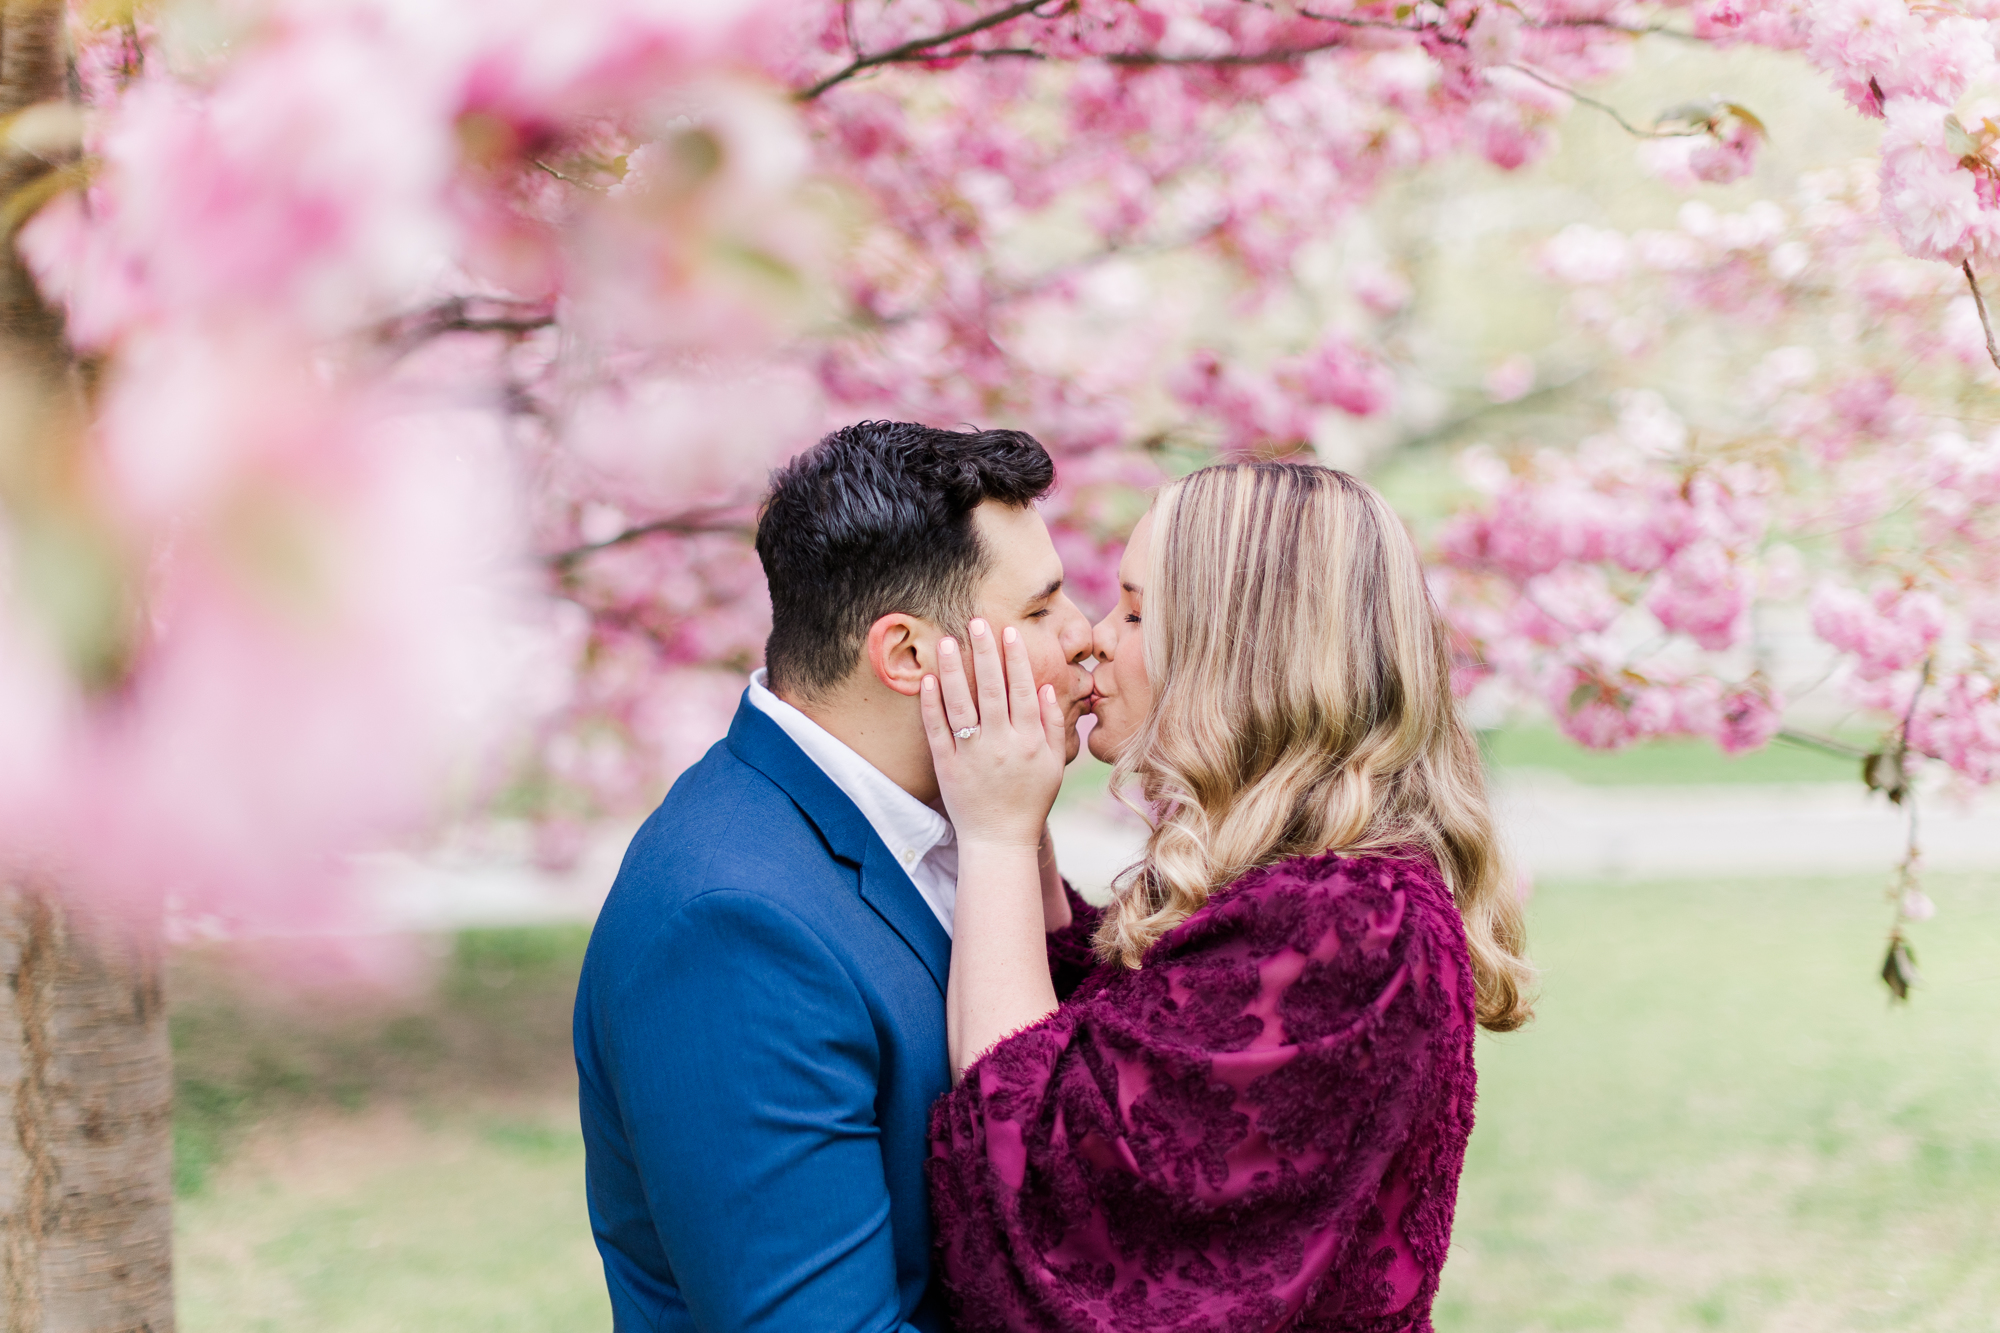 Cheerful Engagement Pictures in Central Park